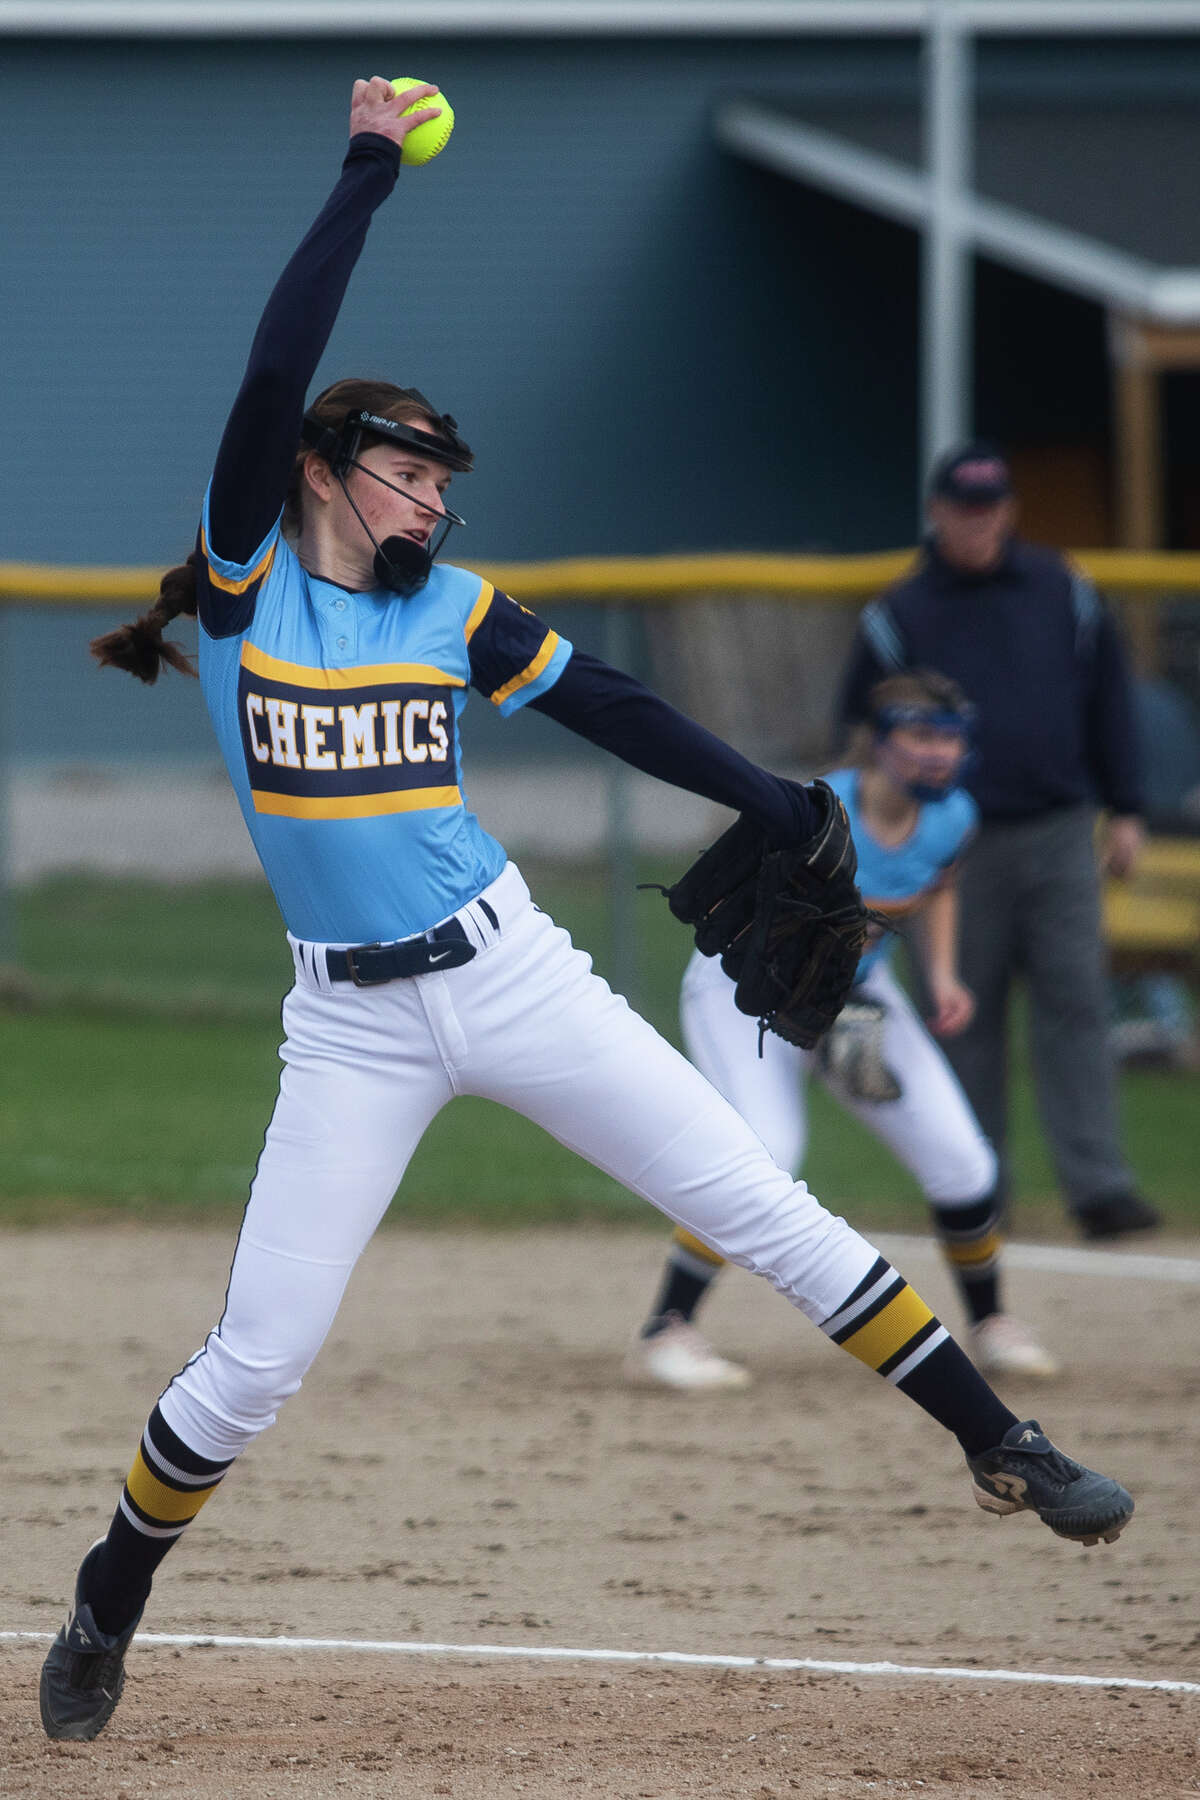 Midland High's Rachel Mecca delivers a pitch during an April 25, 2022 game against Grand Blanc.